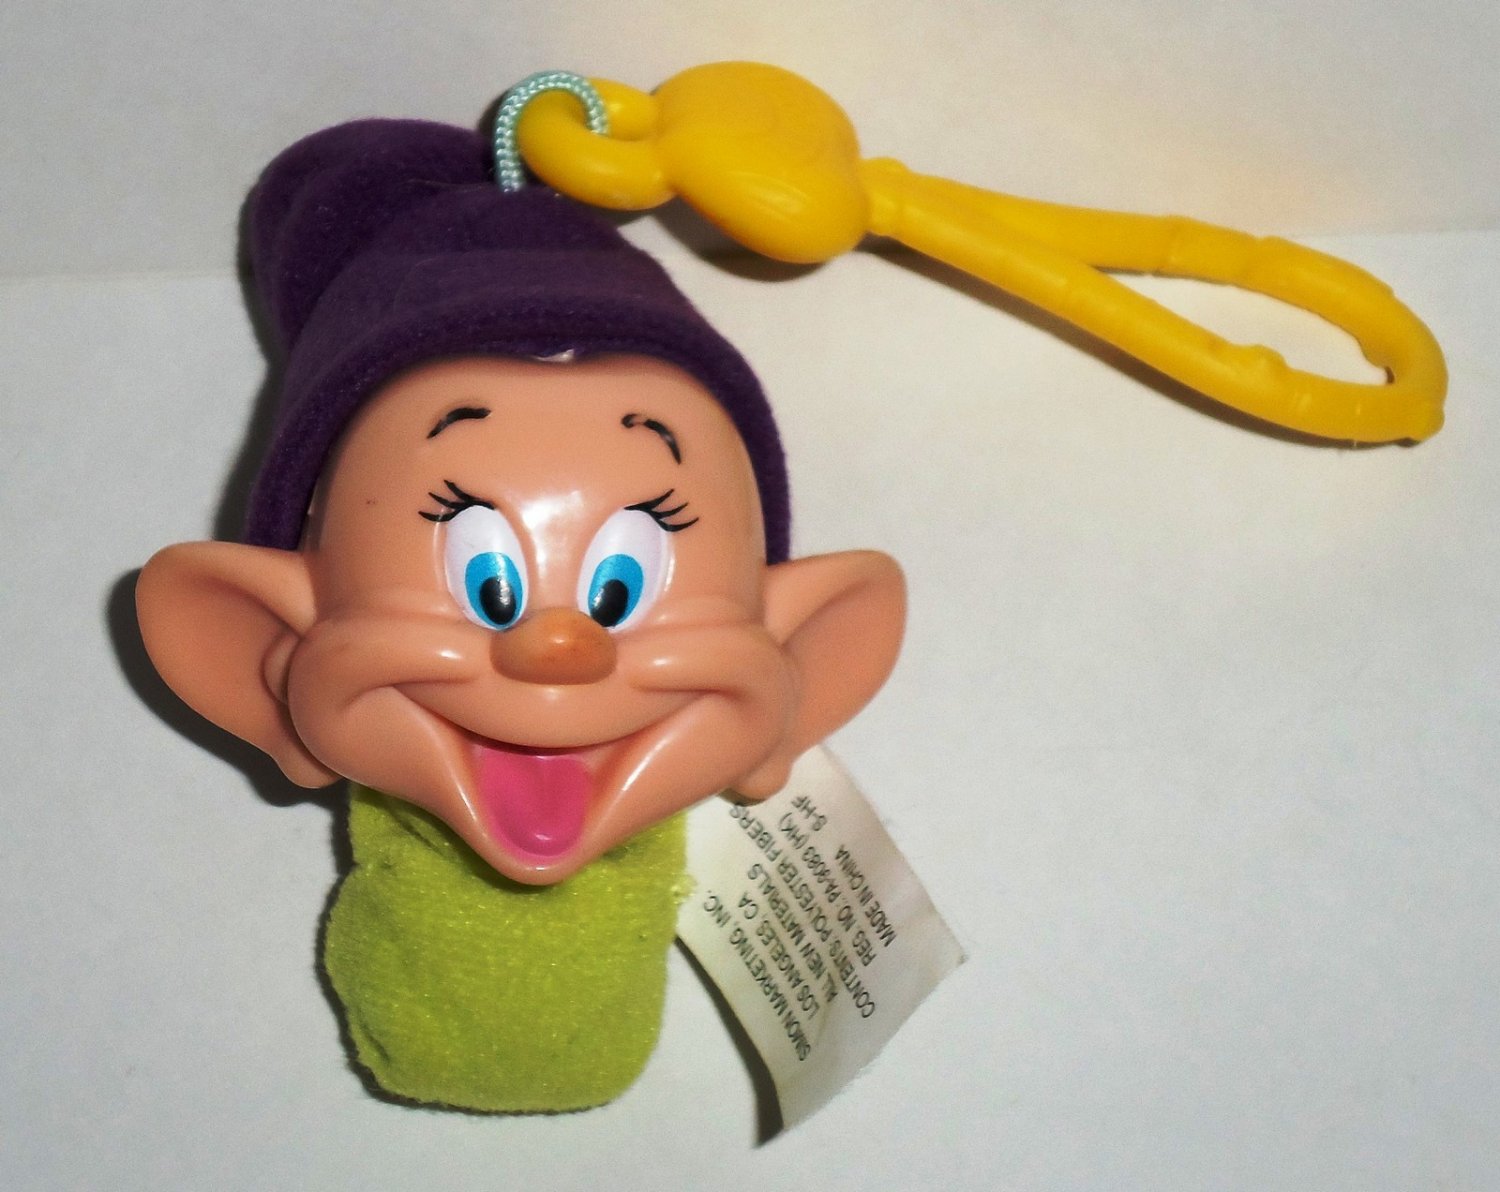 Mcdonalds 2001 Disneys Snow White And The Seven Dwarfs Dopey Happy Meal Toy Loose Used 